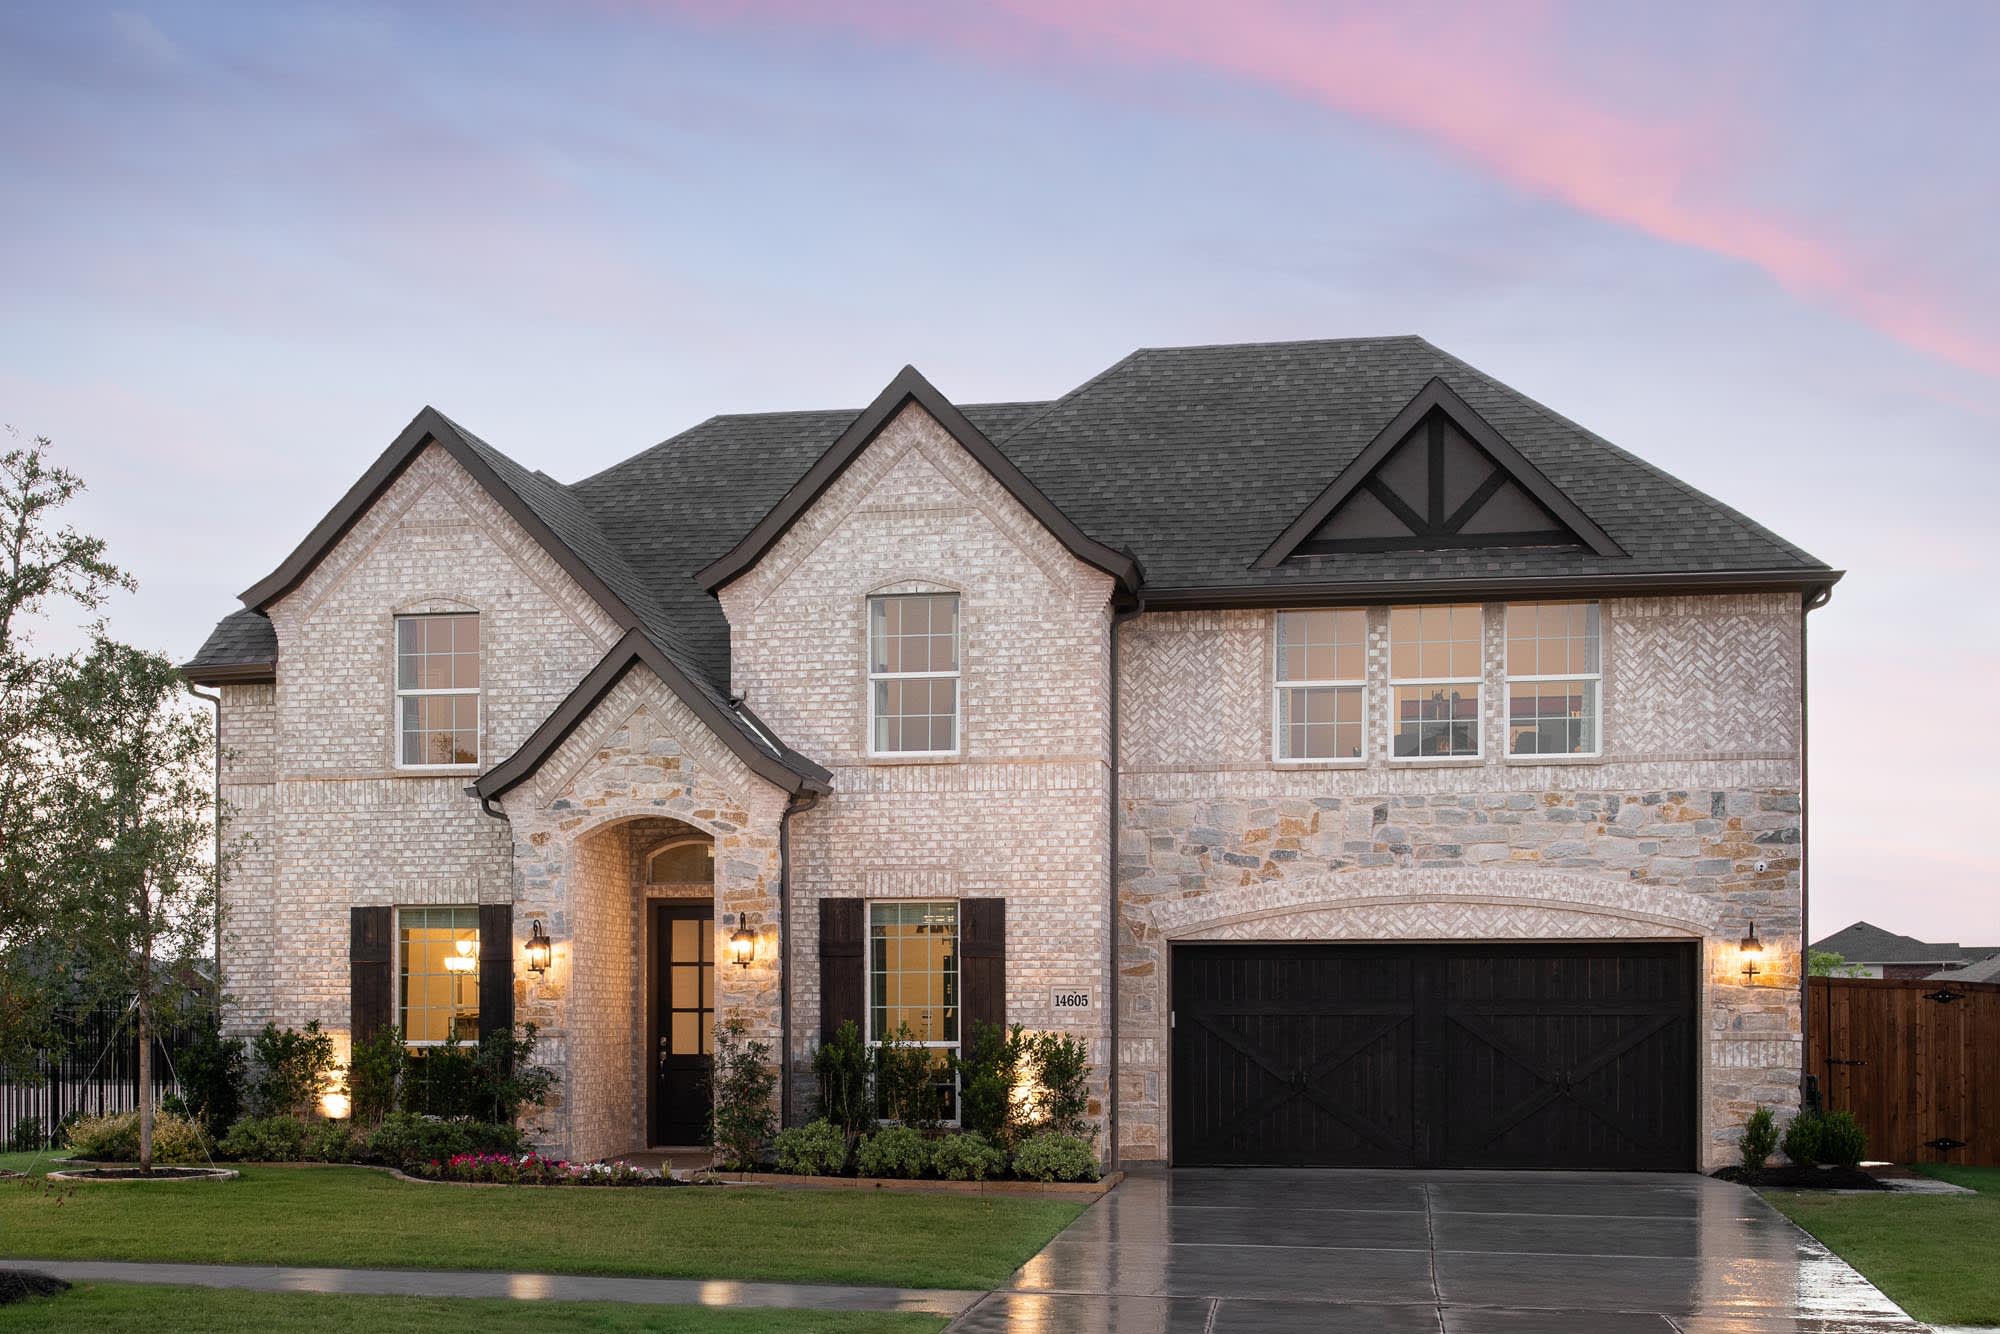 Elevation A with Stone | Concept 3135 at Redden Farms - Signature Series in Midlothian, TX by Landsea Homes